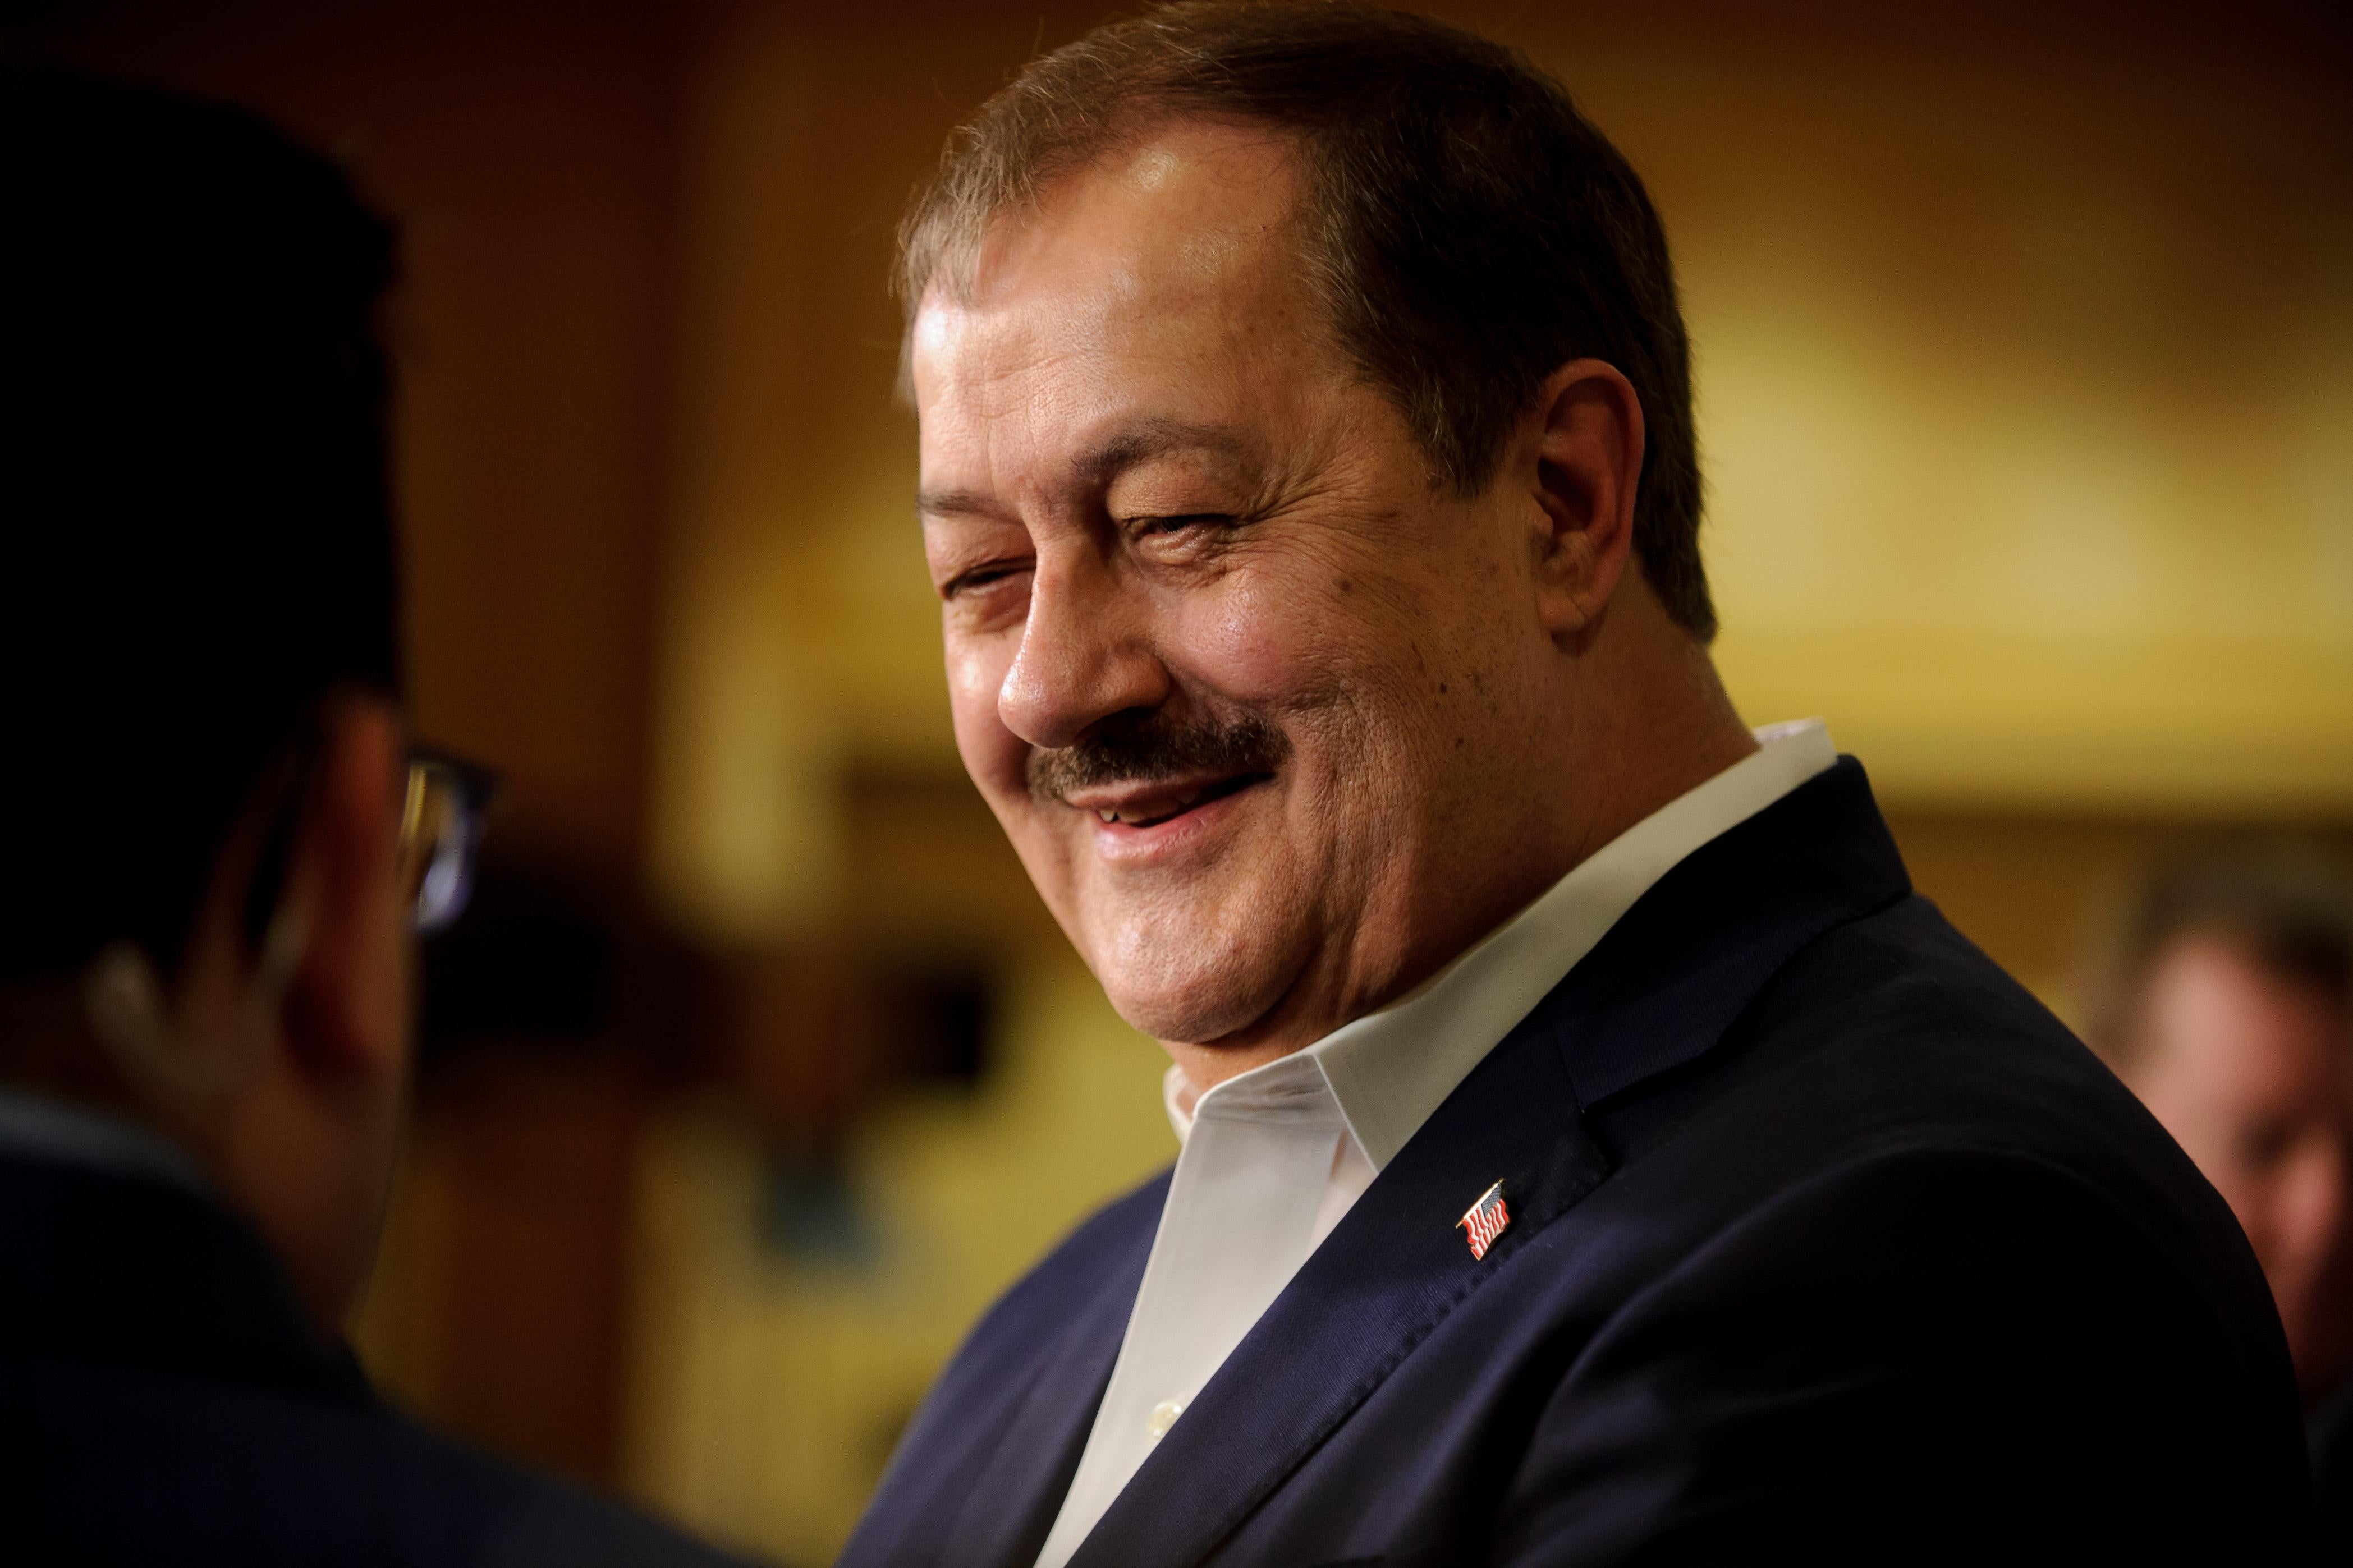 Don Blankenship smiles as he speaks to reporters.